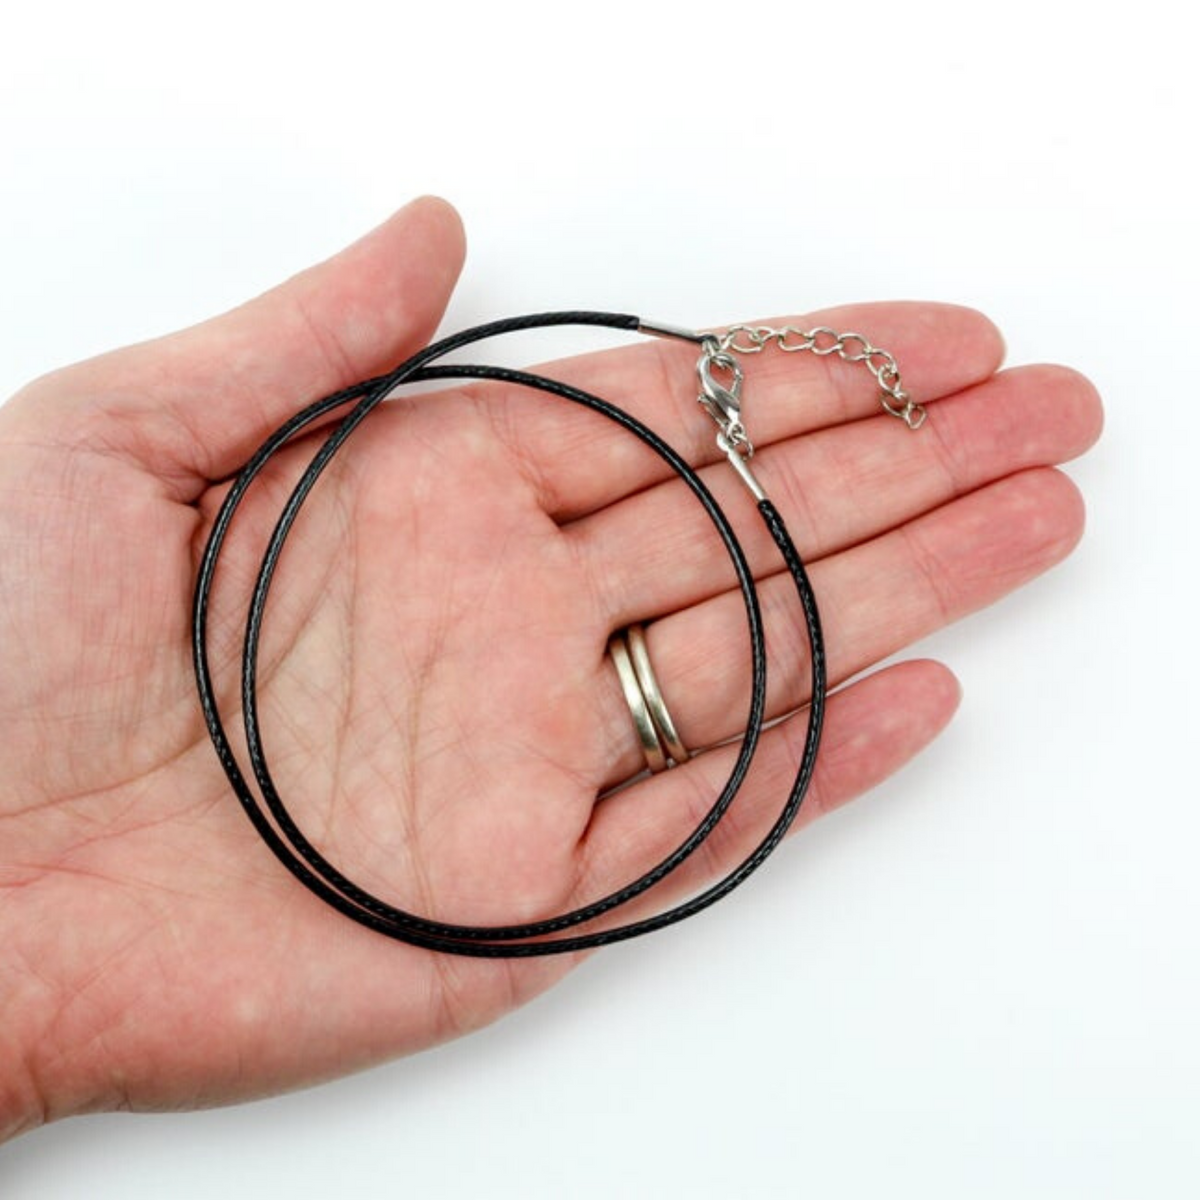 Cord, Leather Cord Necklace, Black,18 inches L, Available in 2mm